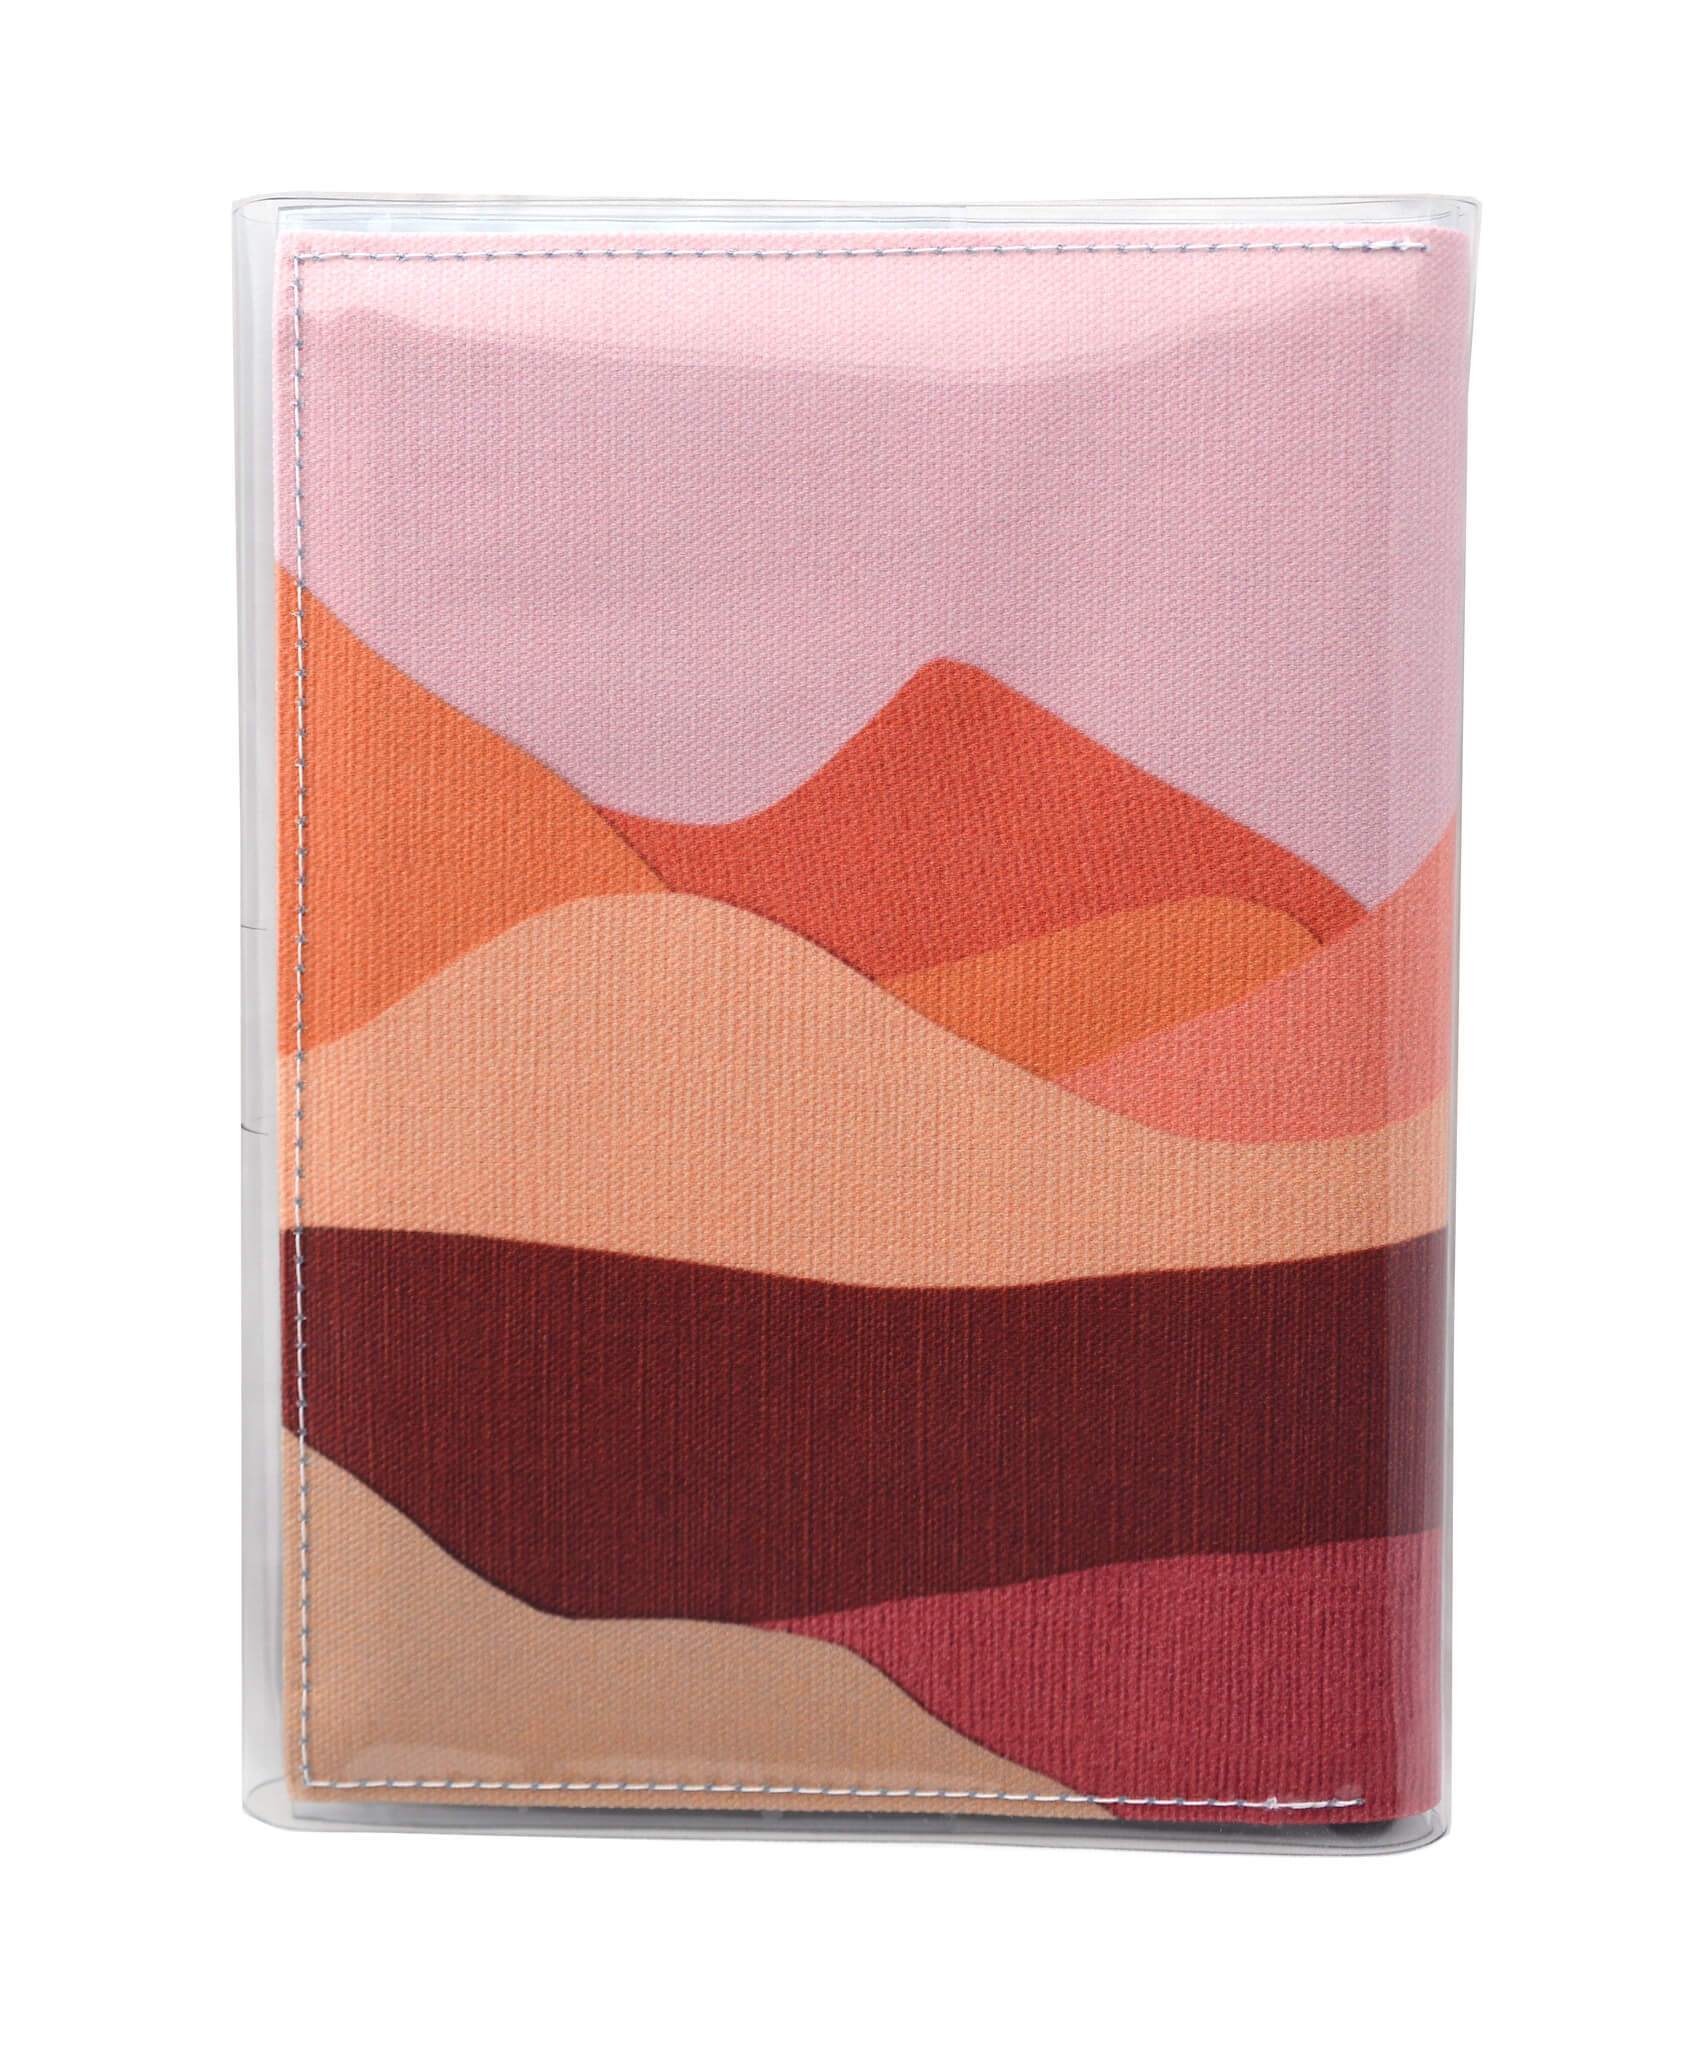 This is an image of the rear of a Kitty Came Home A5 journal in the 'Lilly of the valley' design by Satin and Tat. A landscape of orange, pink, burgundy and magenta hills beneath a dusty pink sky.